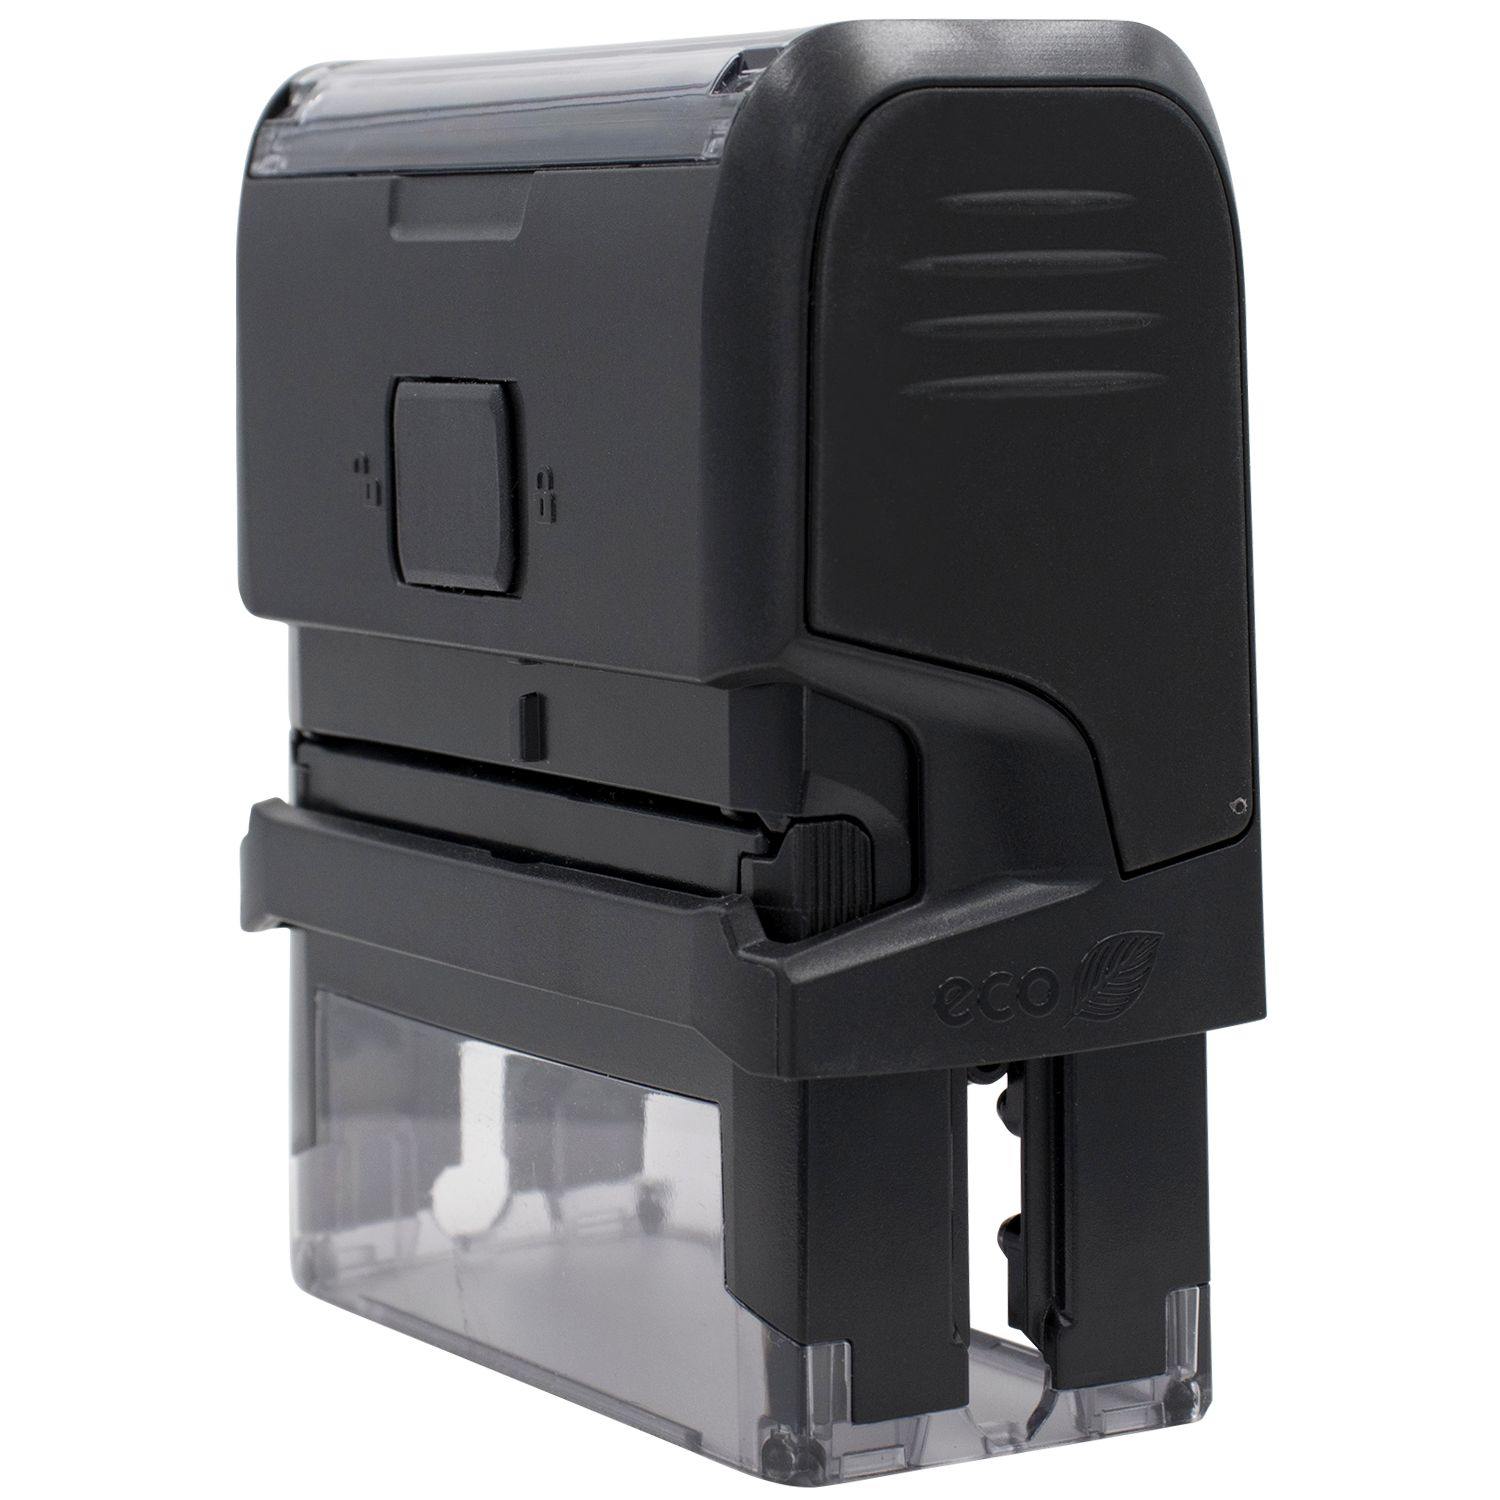 Large Self-Inking Social Distancing 6 Feet Stamp - Engineer Seal Stamps - Brand_Trodat, Impression Size_Large, Stamp Type_Self-Inking Stamp, Type of Use_General, Type of Use_Medical Office